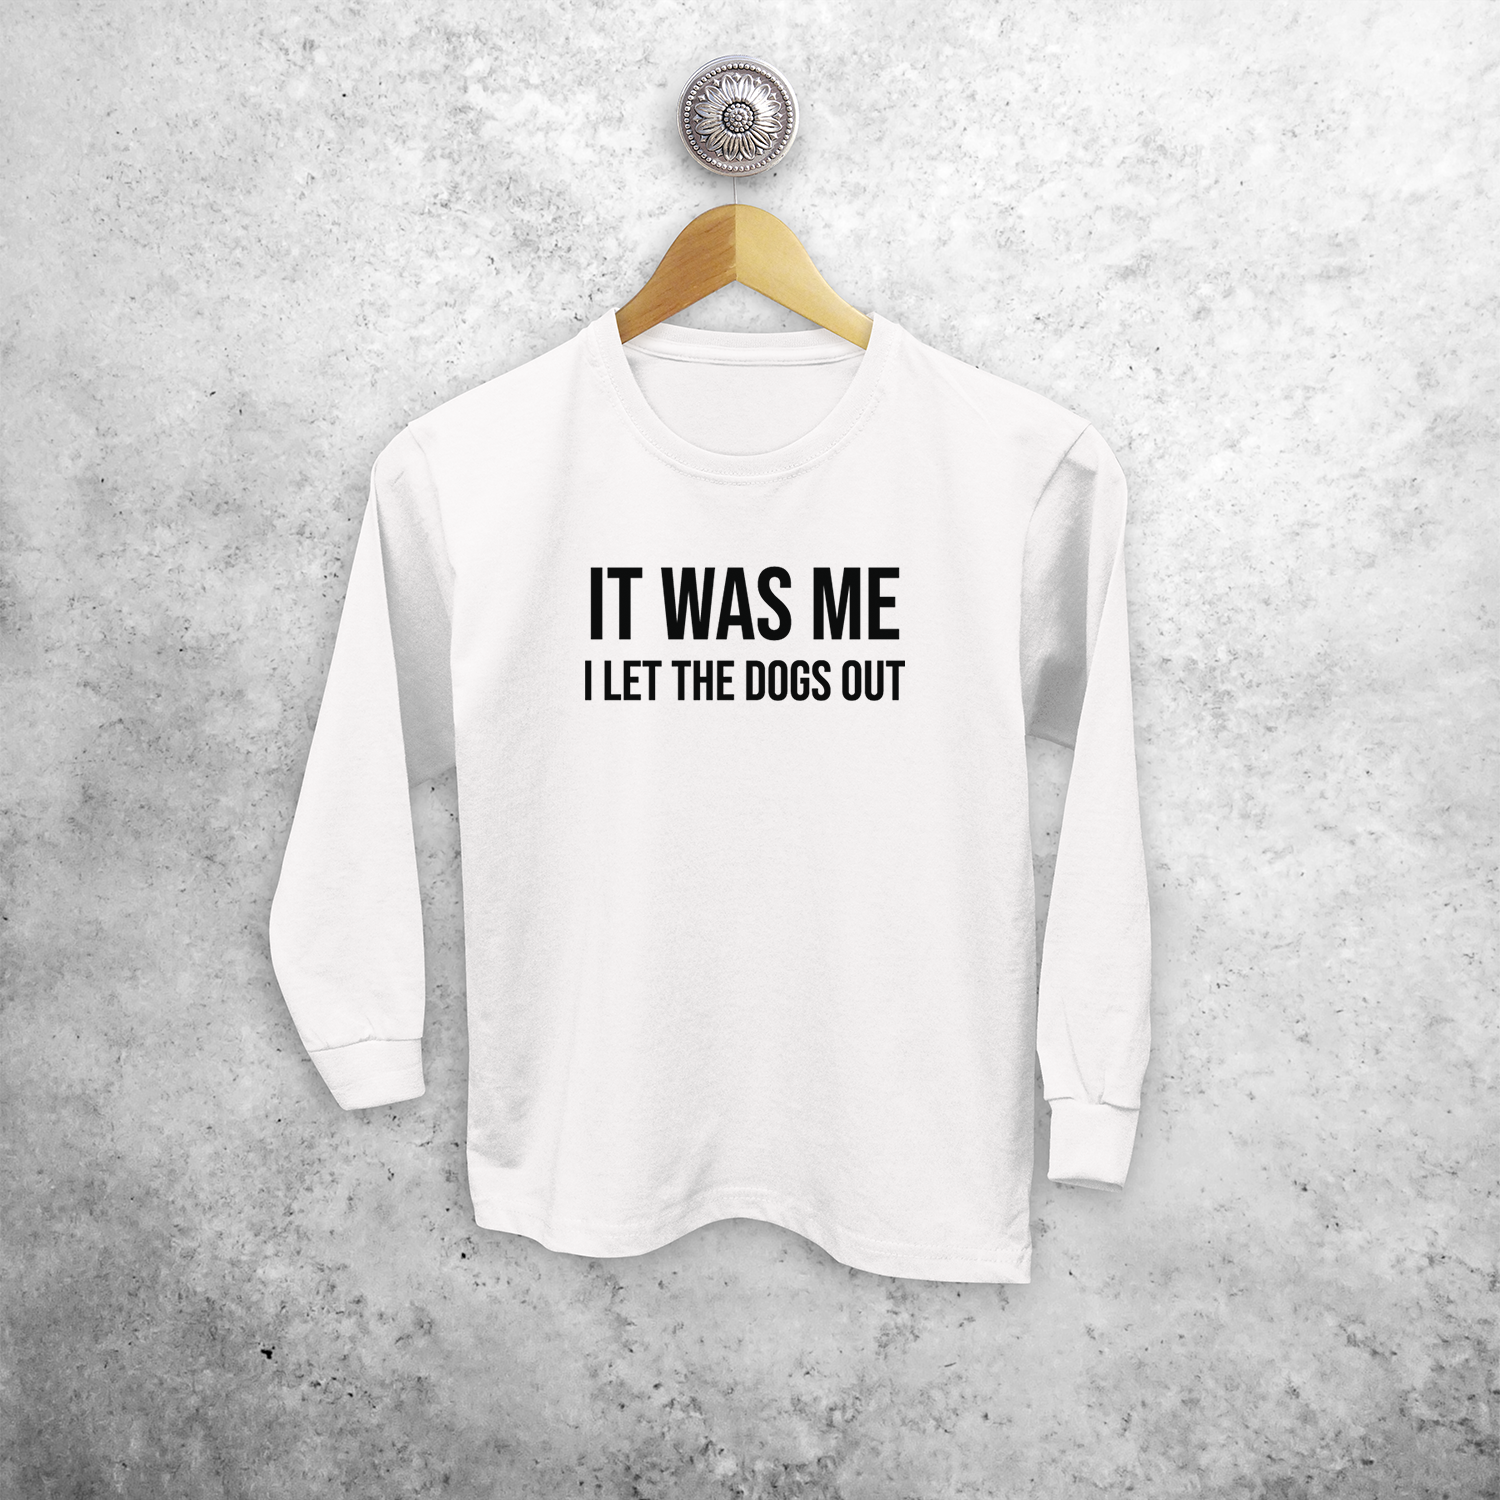 'It was me - I let the dogs out' kids longsleeve shirt